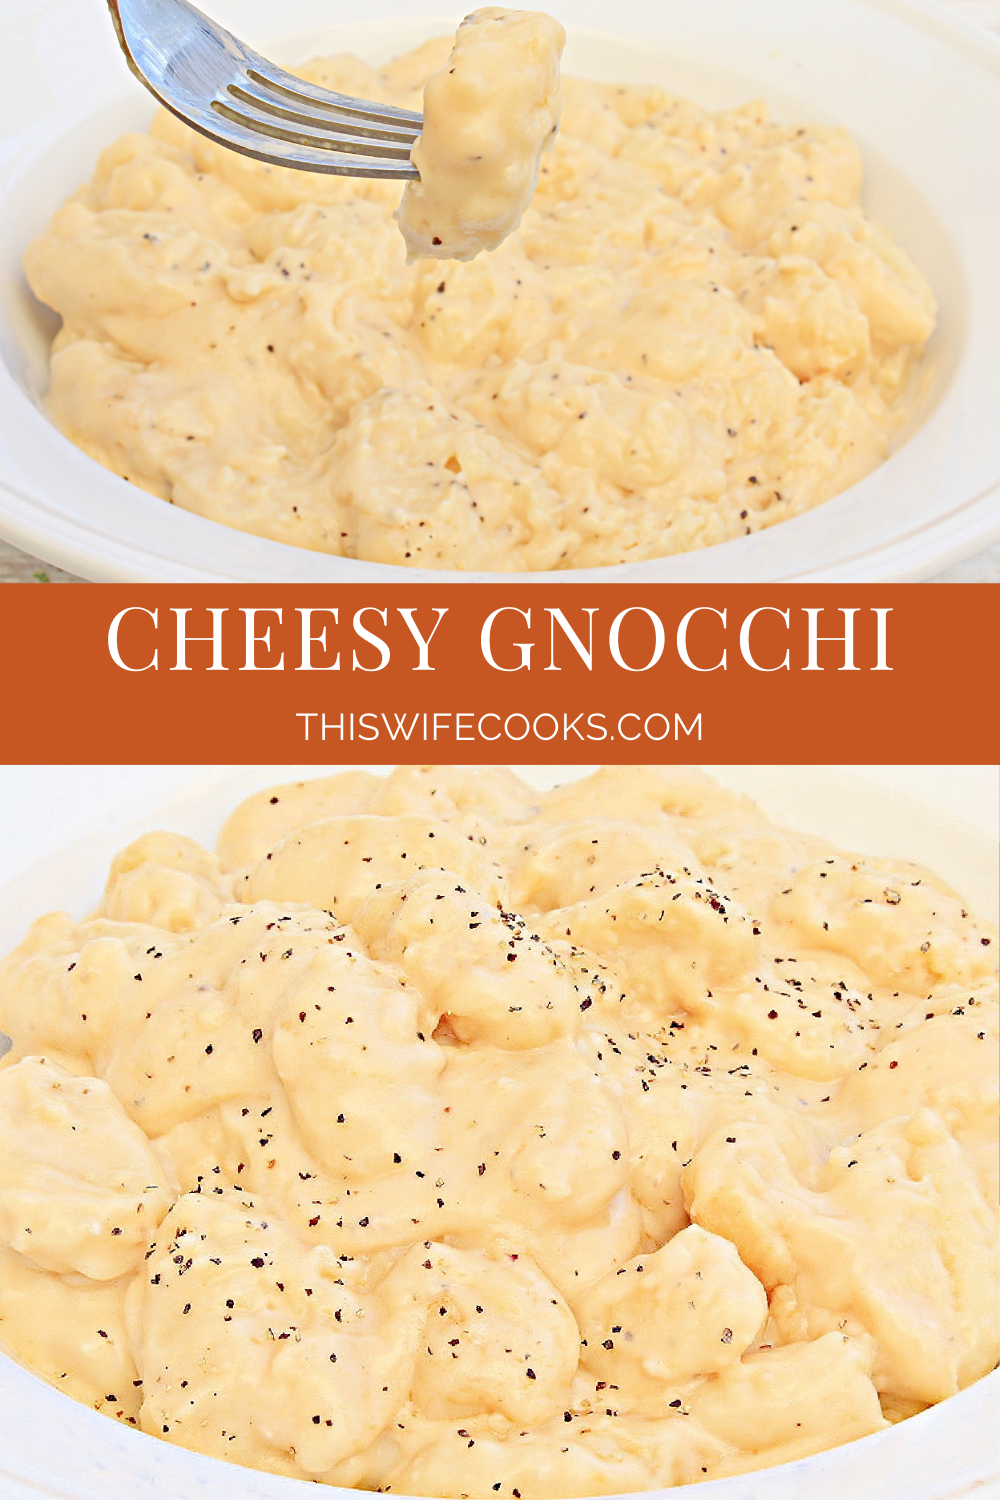 Cheesy Gnocchi ~ This dairy-free variation on mac and cheese is rich, creamy, and pure comfort food! Ready to serve in 20 minutes or less. via @thiswifecooks